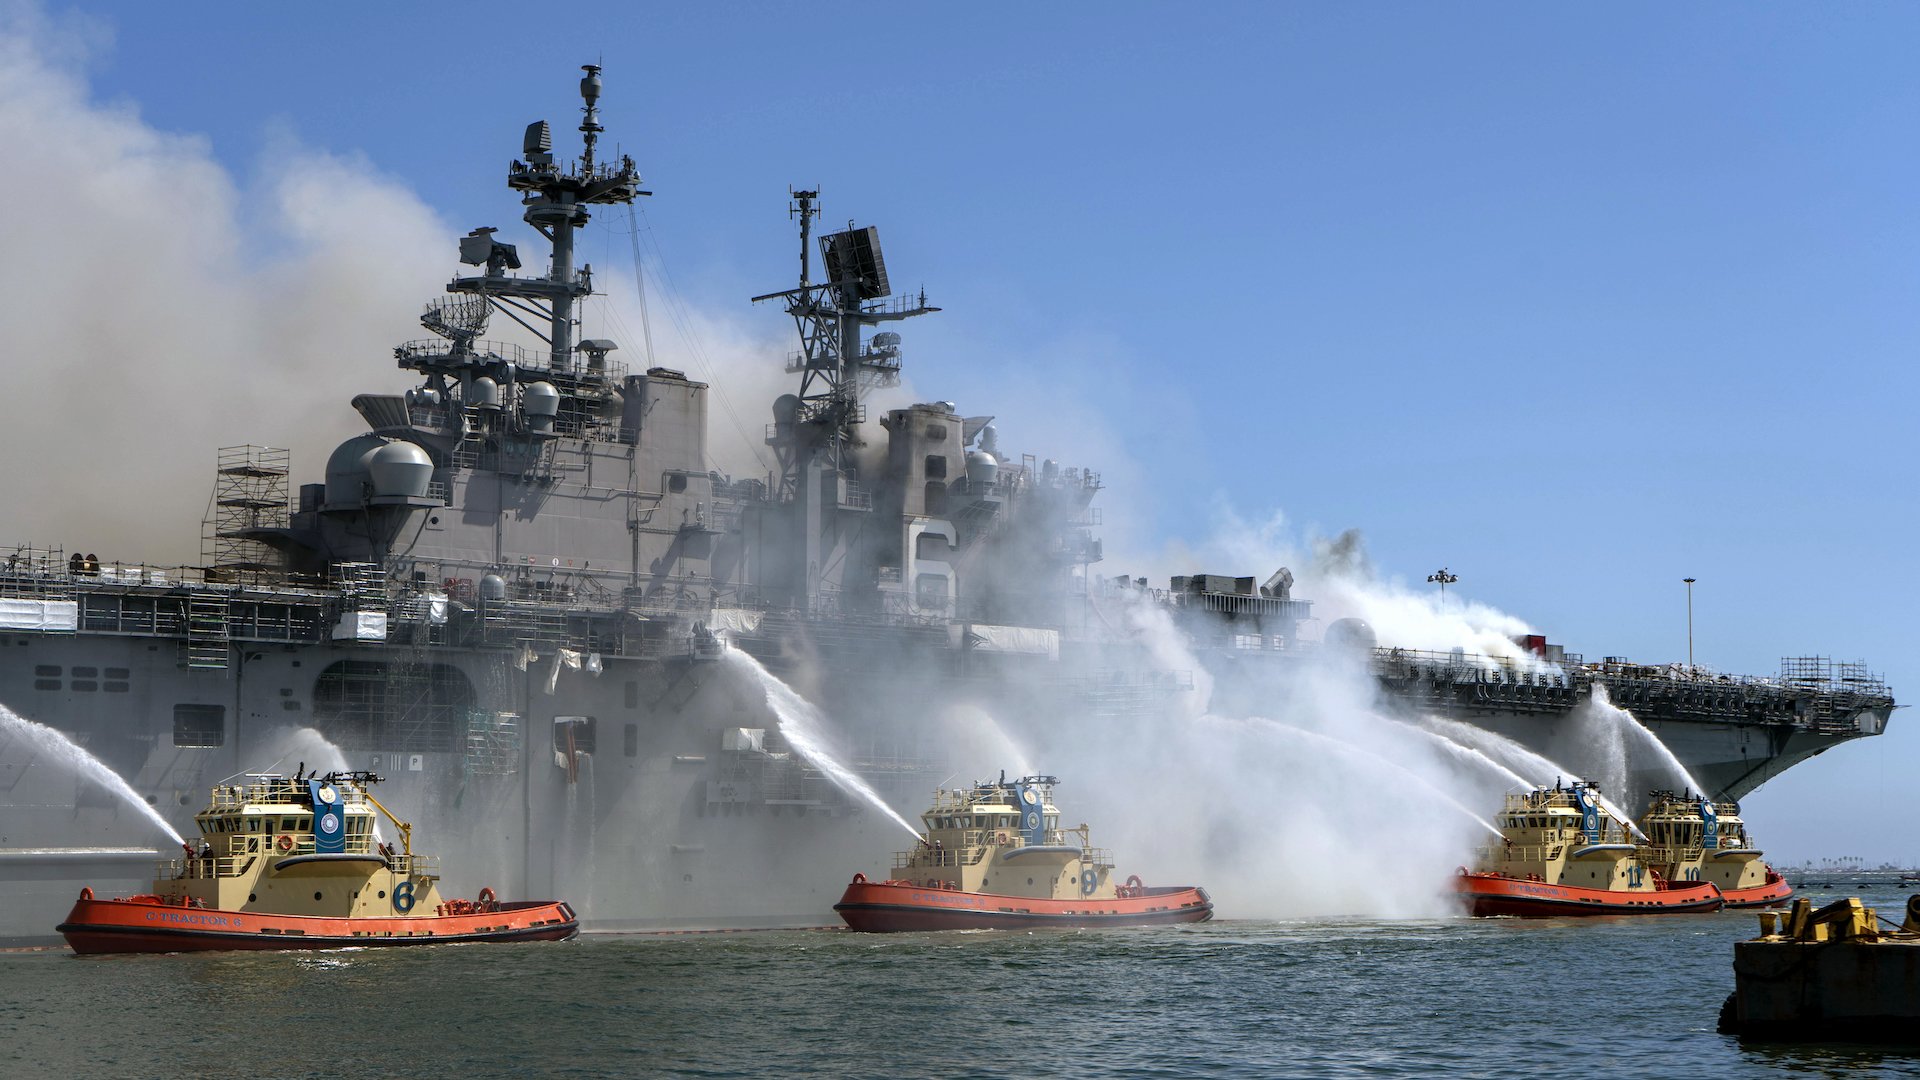 Sailors and federal firefighters combat a fire on board the USS Bonhomme Richard at Naval Base San Diego, July 12, 2020. Navy photo by Mass Communication Specialist 3rd Class Christina Ross.